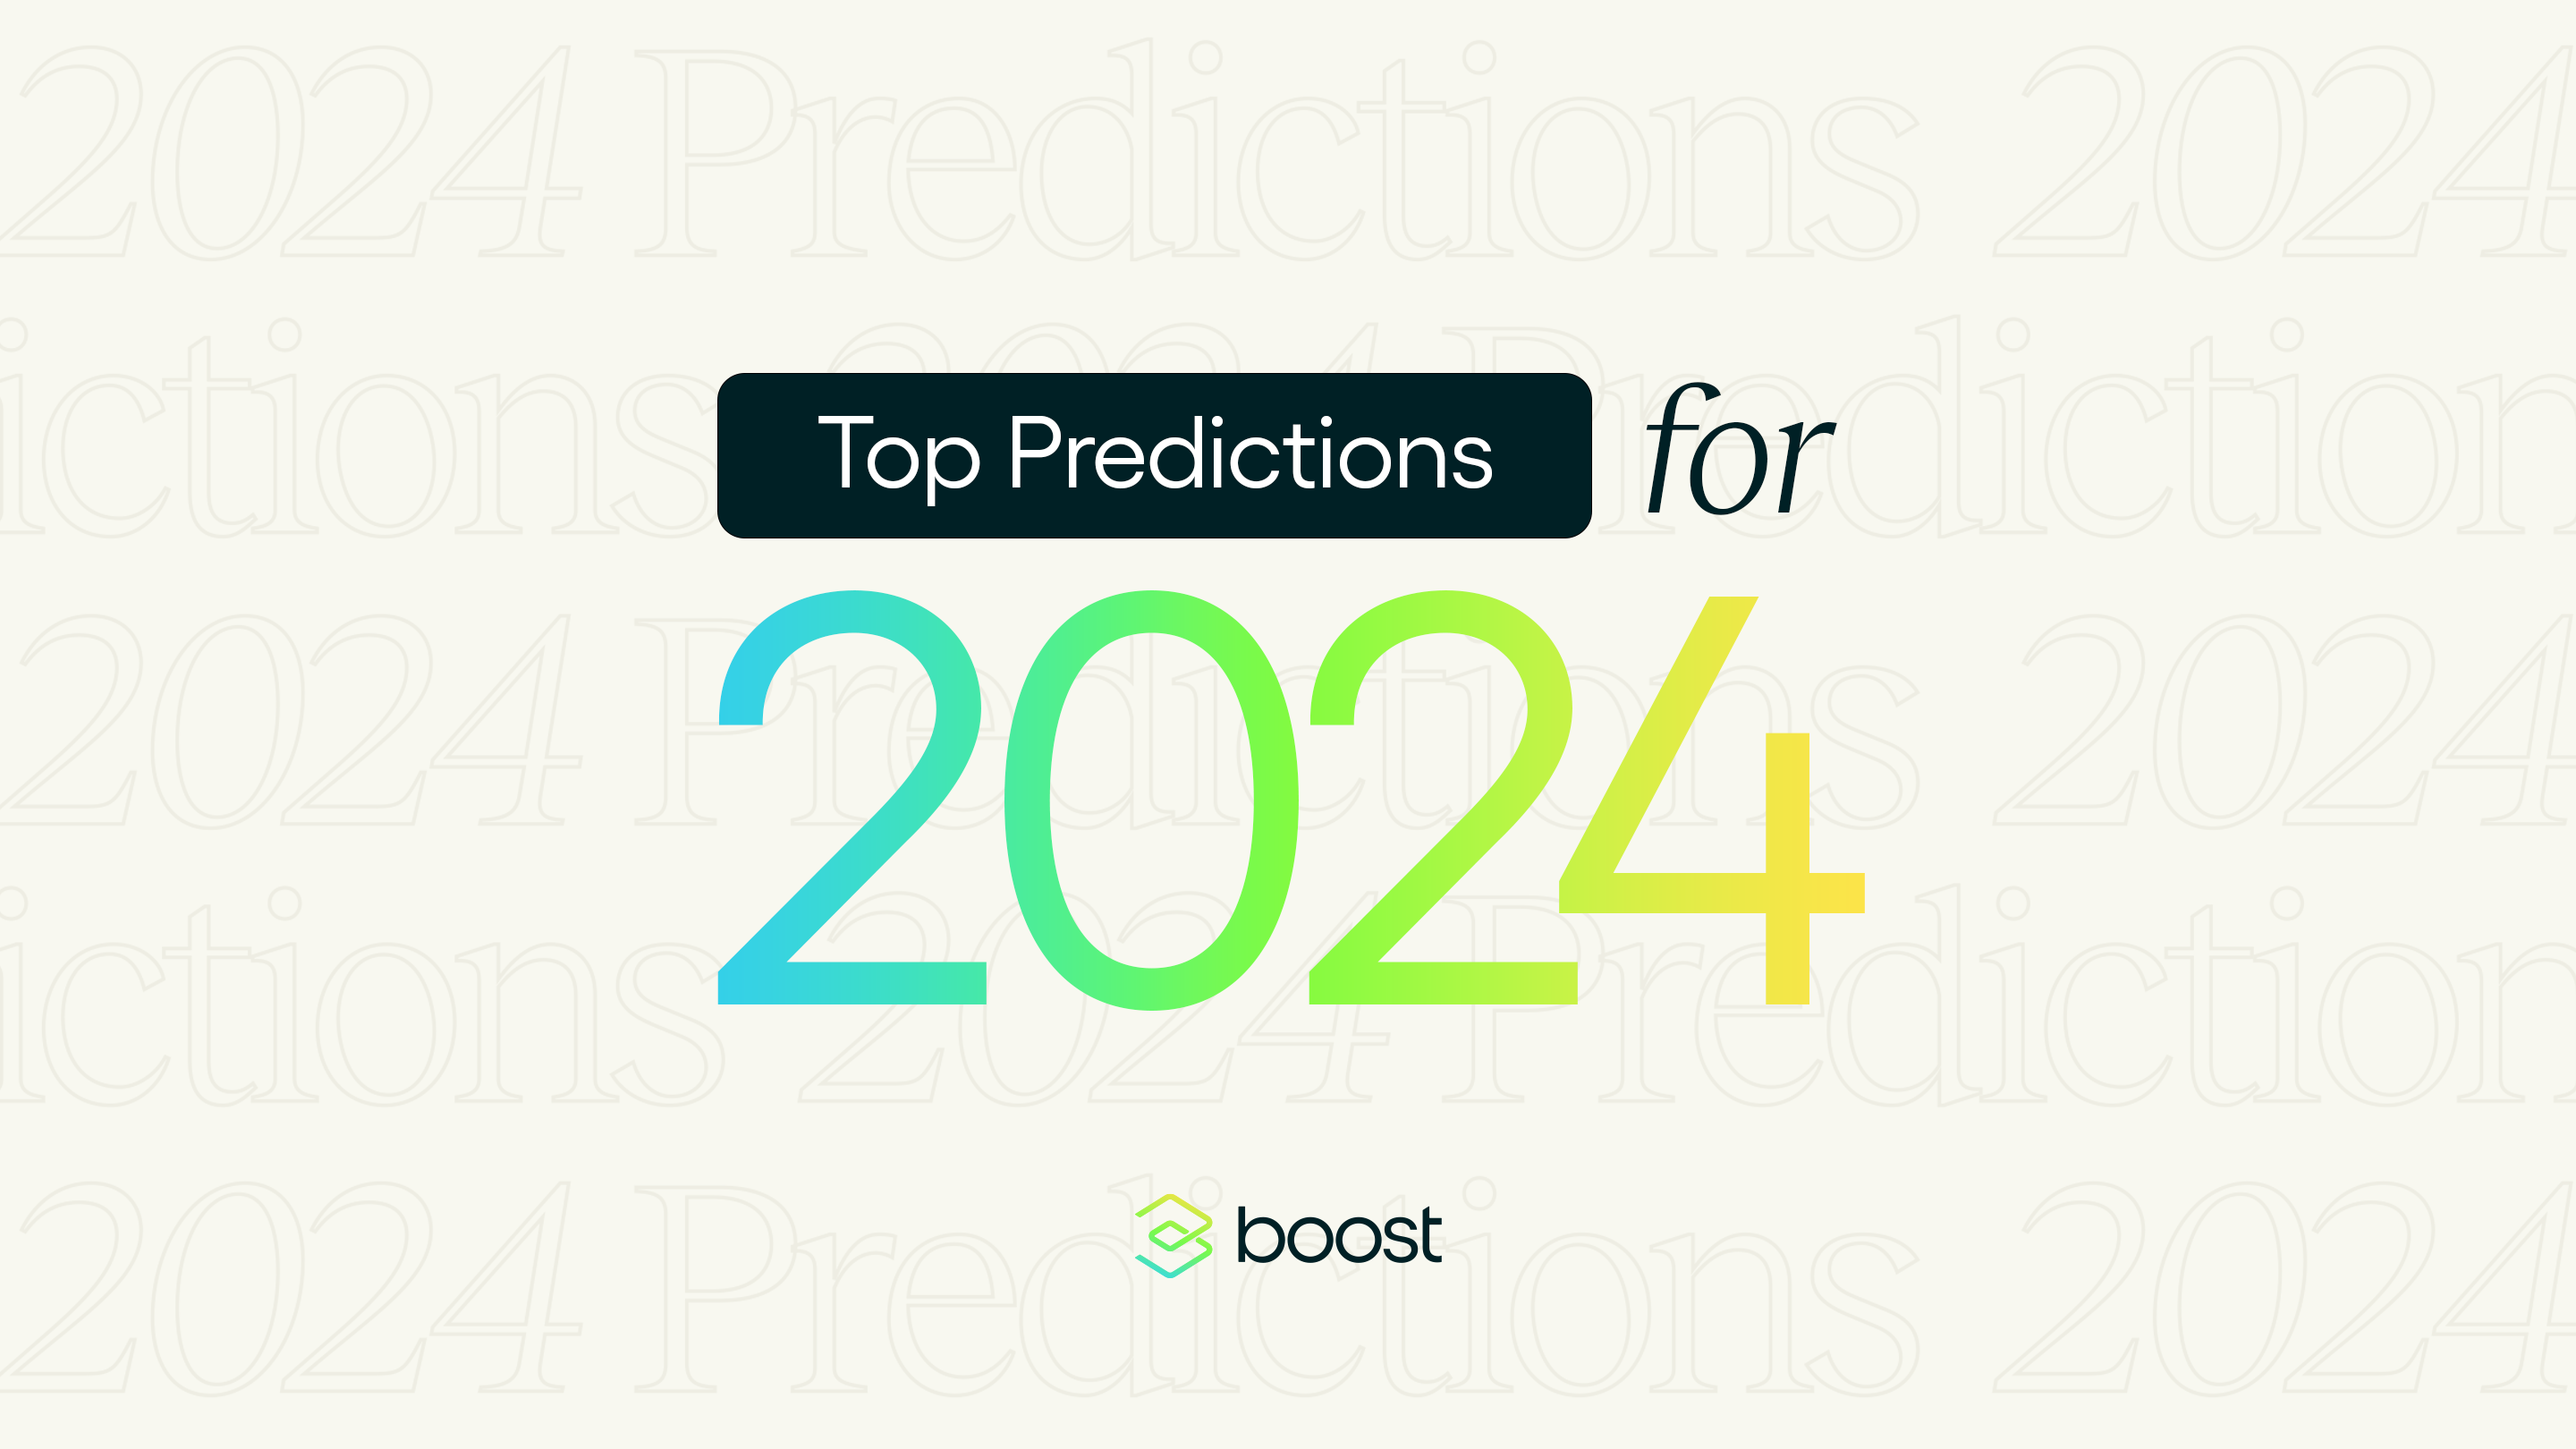 Boost's Top Predictions for 2024